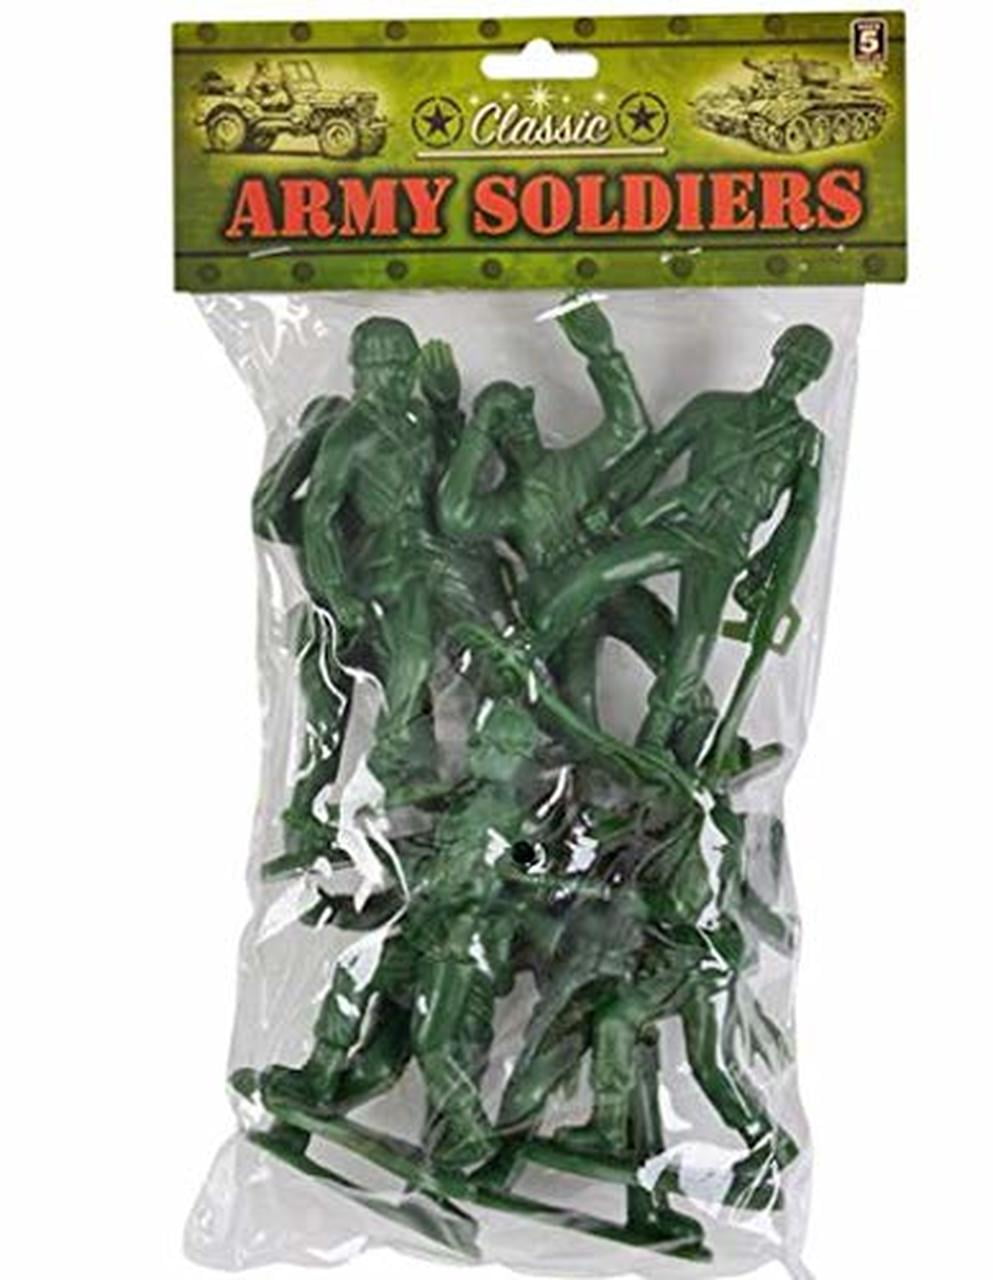 Lot of 144 Green Plastic Mini Army Men 1" Inch Bulk Action Figures Toy Soldiers 